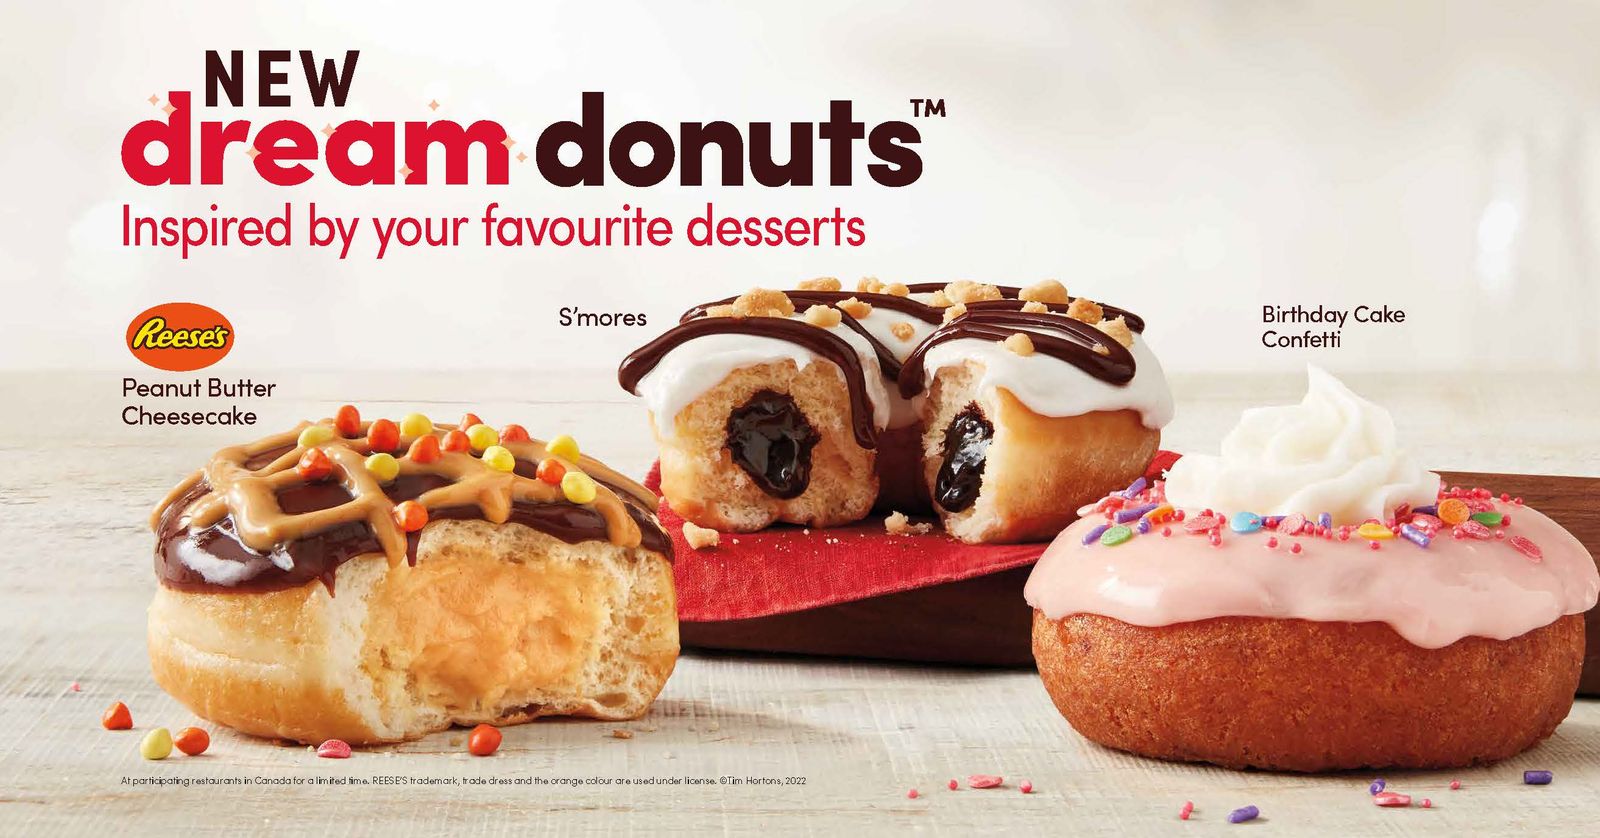 The Tim Hortons Holiday Menu For 2022 Just Dropped & There Are New